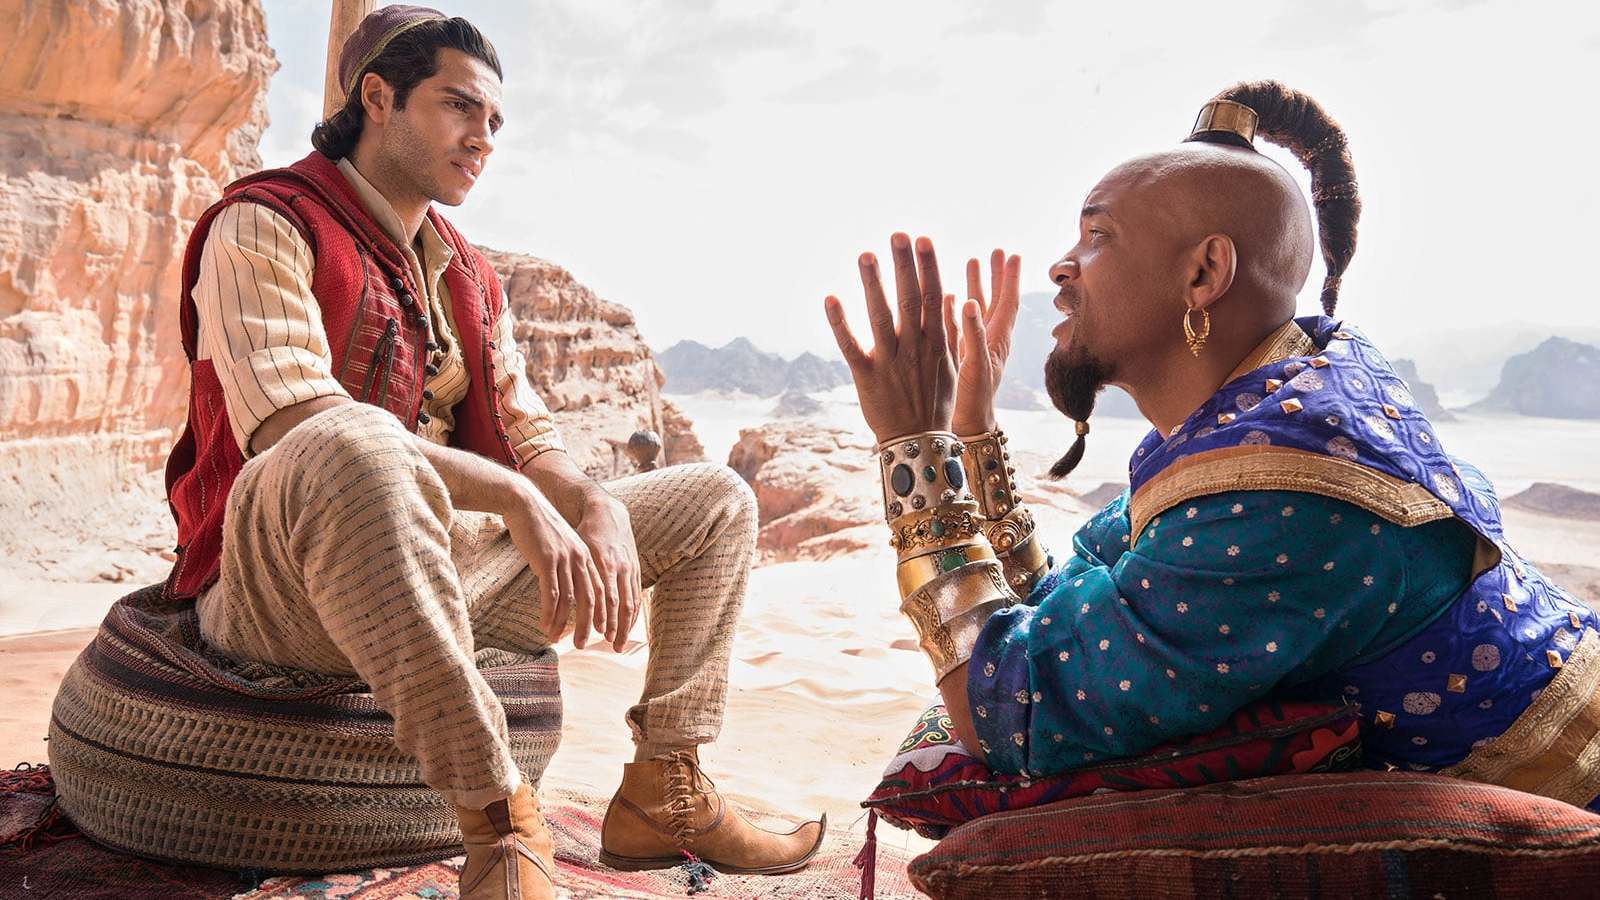 5 Reasons To Be Excited for Disney’s Live-Action Aladdin